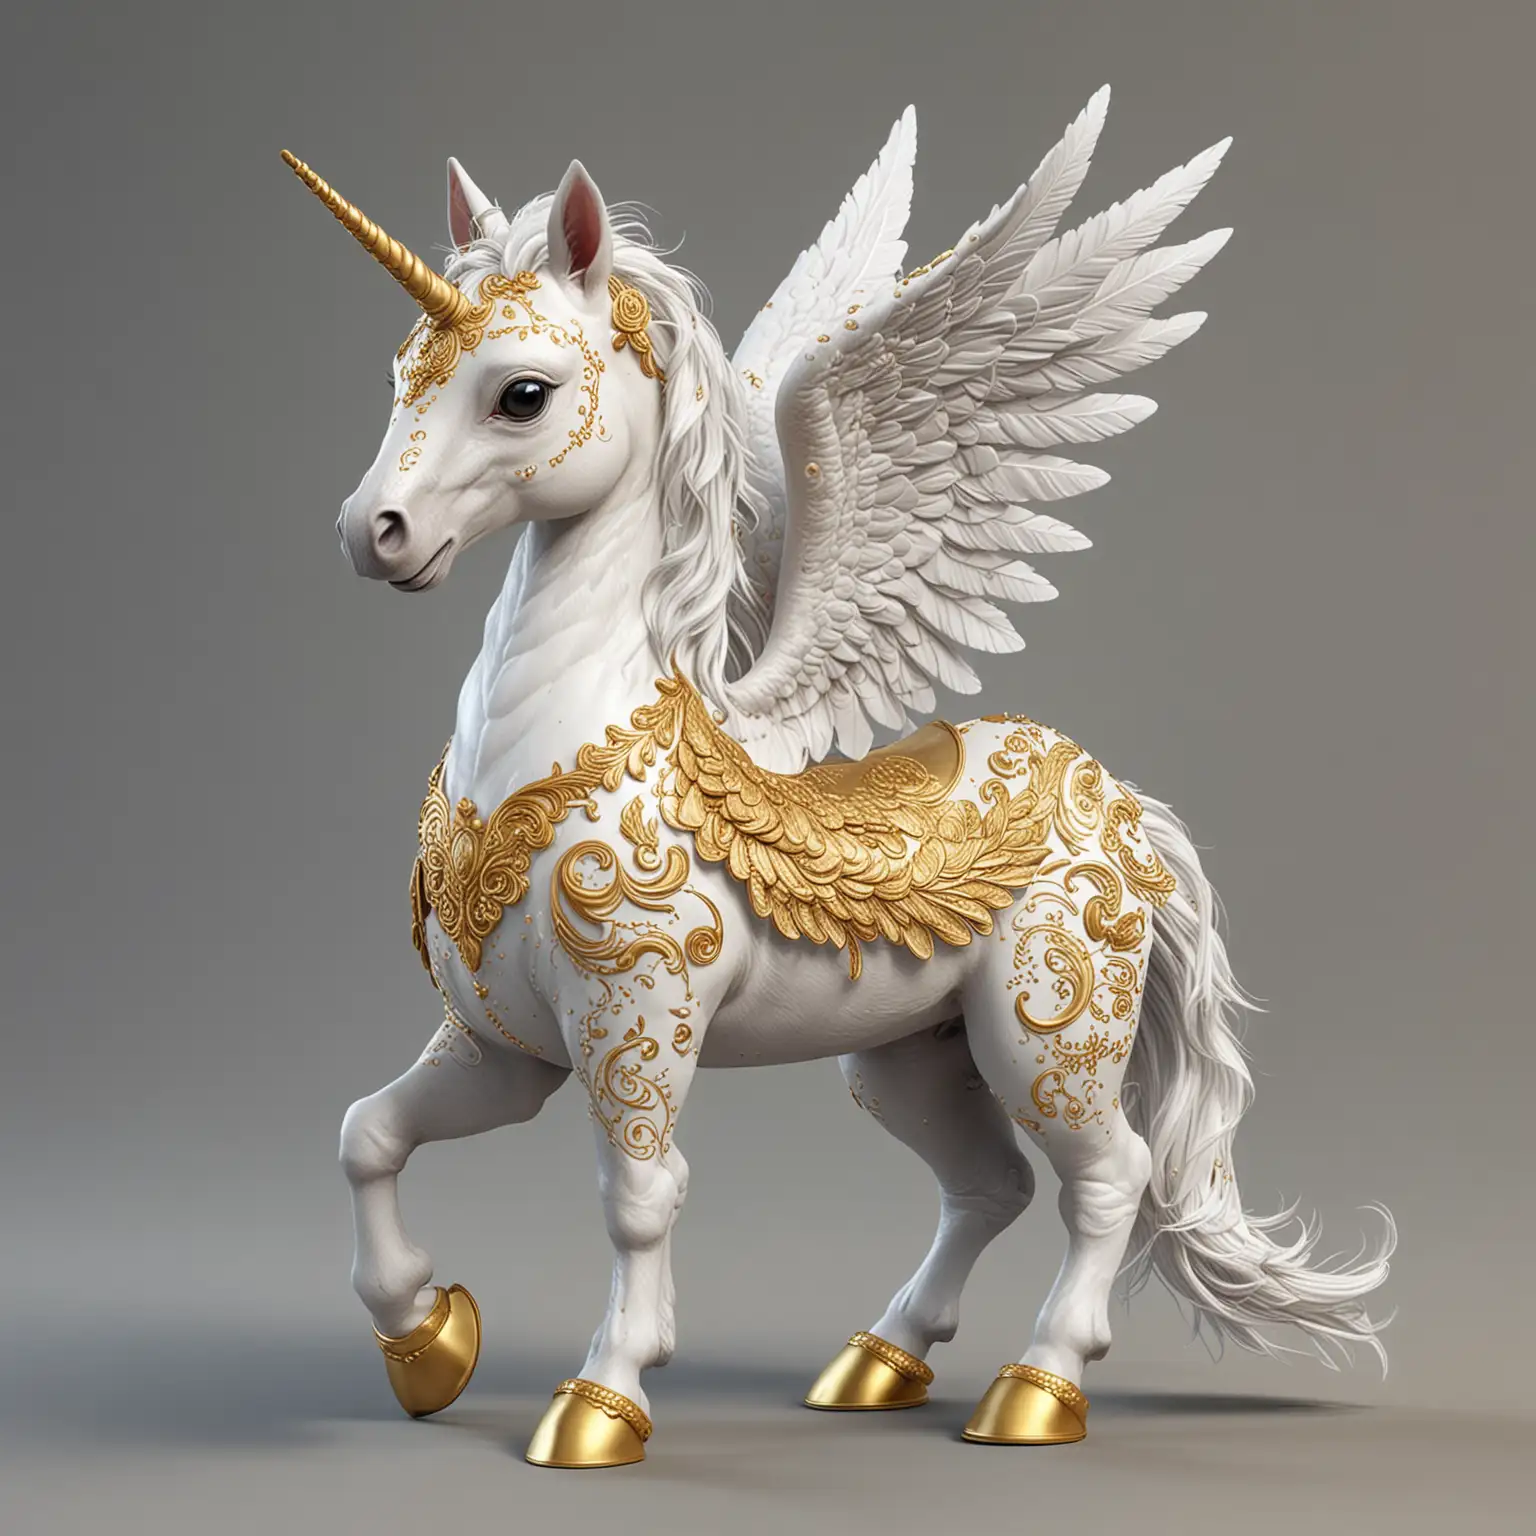 Realistic Cute Pegasus with Gold Patterns in Full Growth